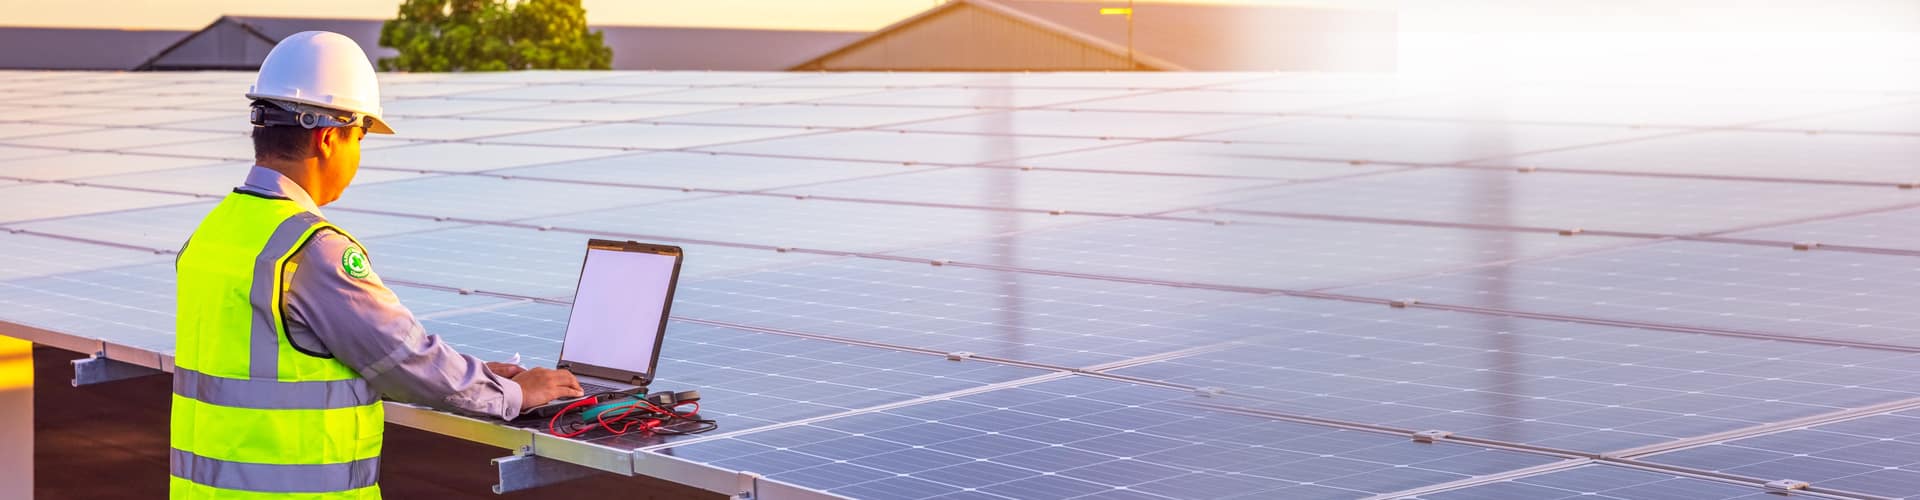 The Ultimate Guide to Solar Panels: Cost, Price, and Energy Consumption